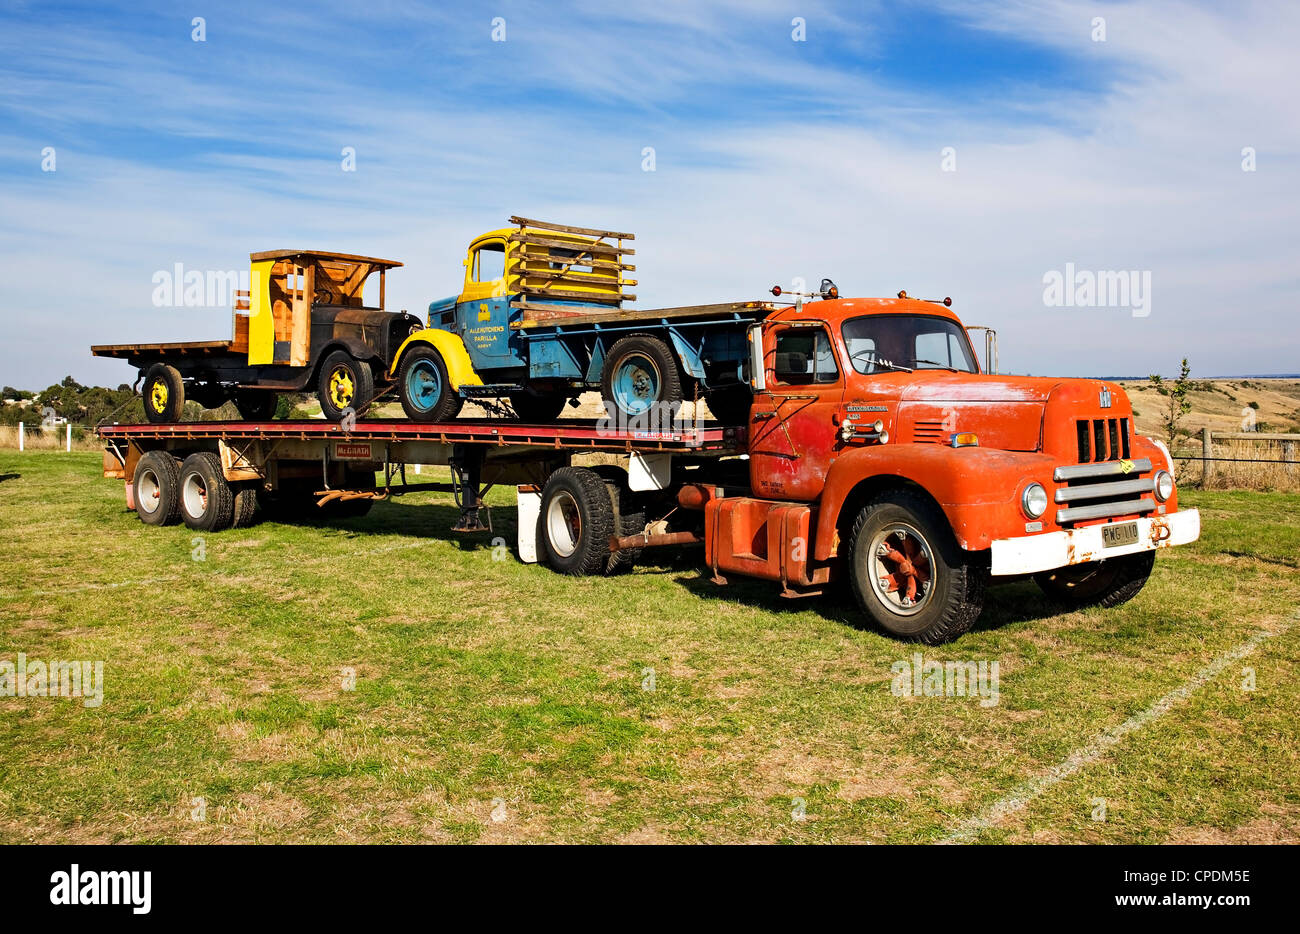 Clunes Australia  /  This R 190 series International semi truck,is on display at the annual Historic Vehicle Show. Stock Photo